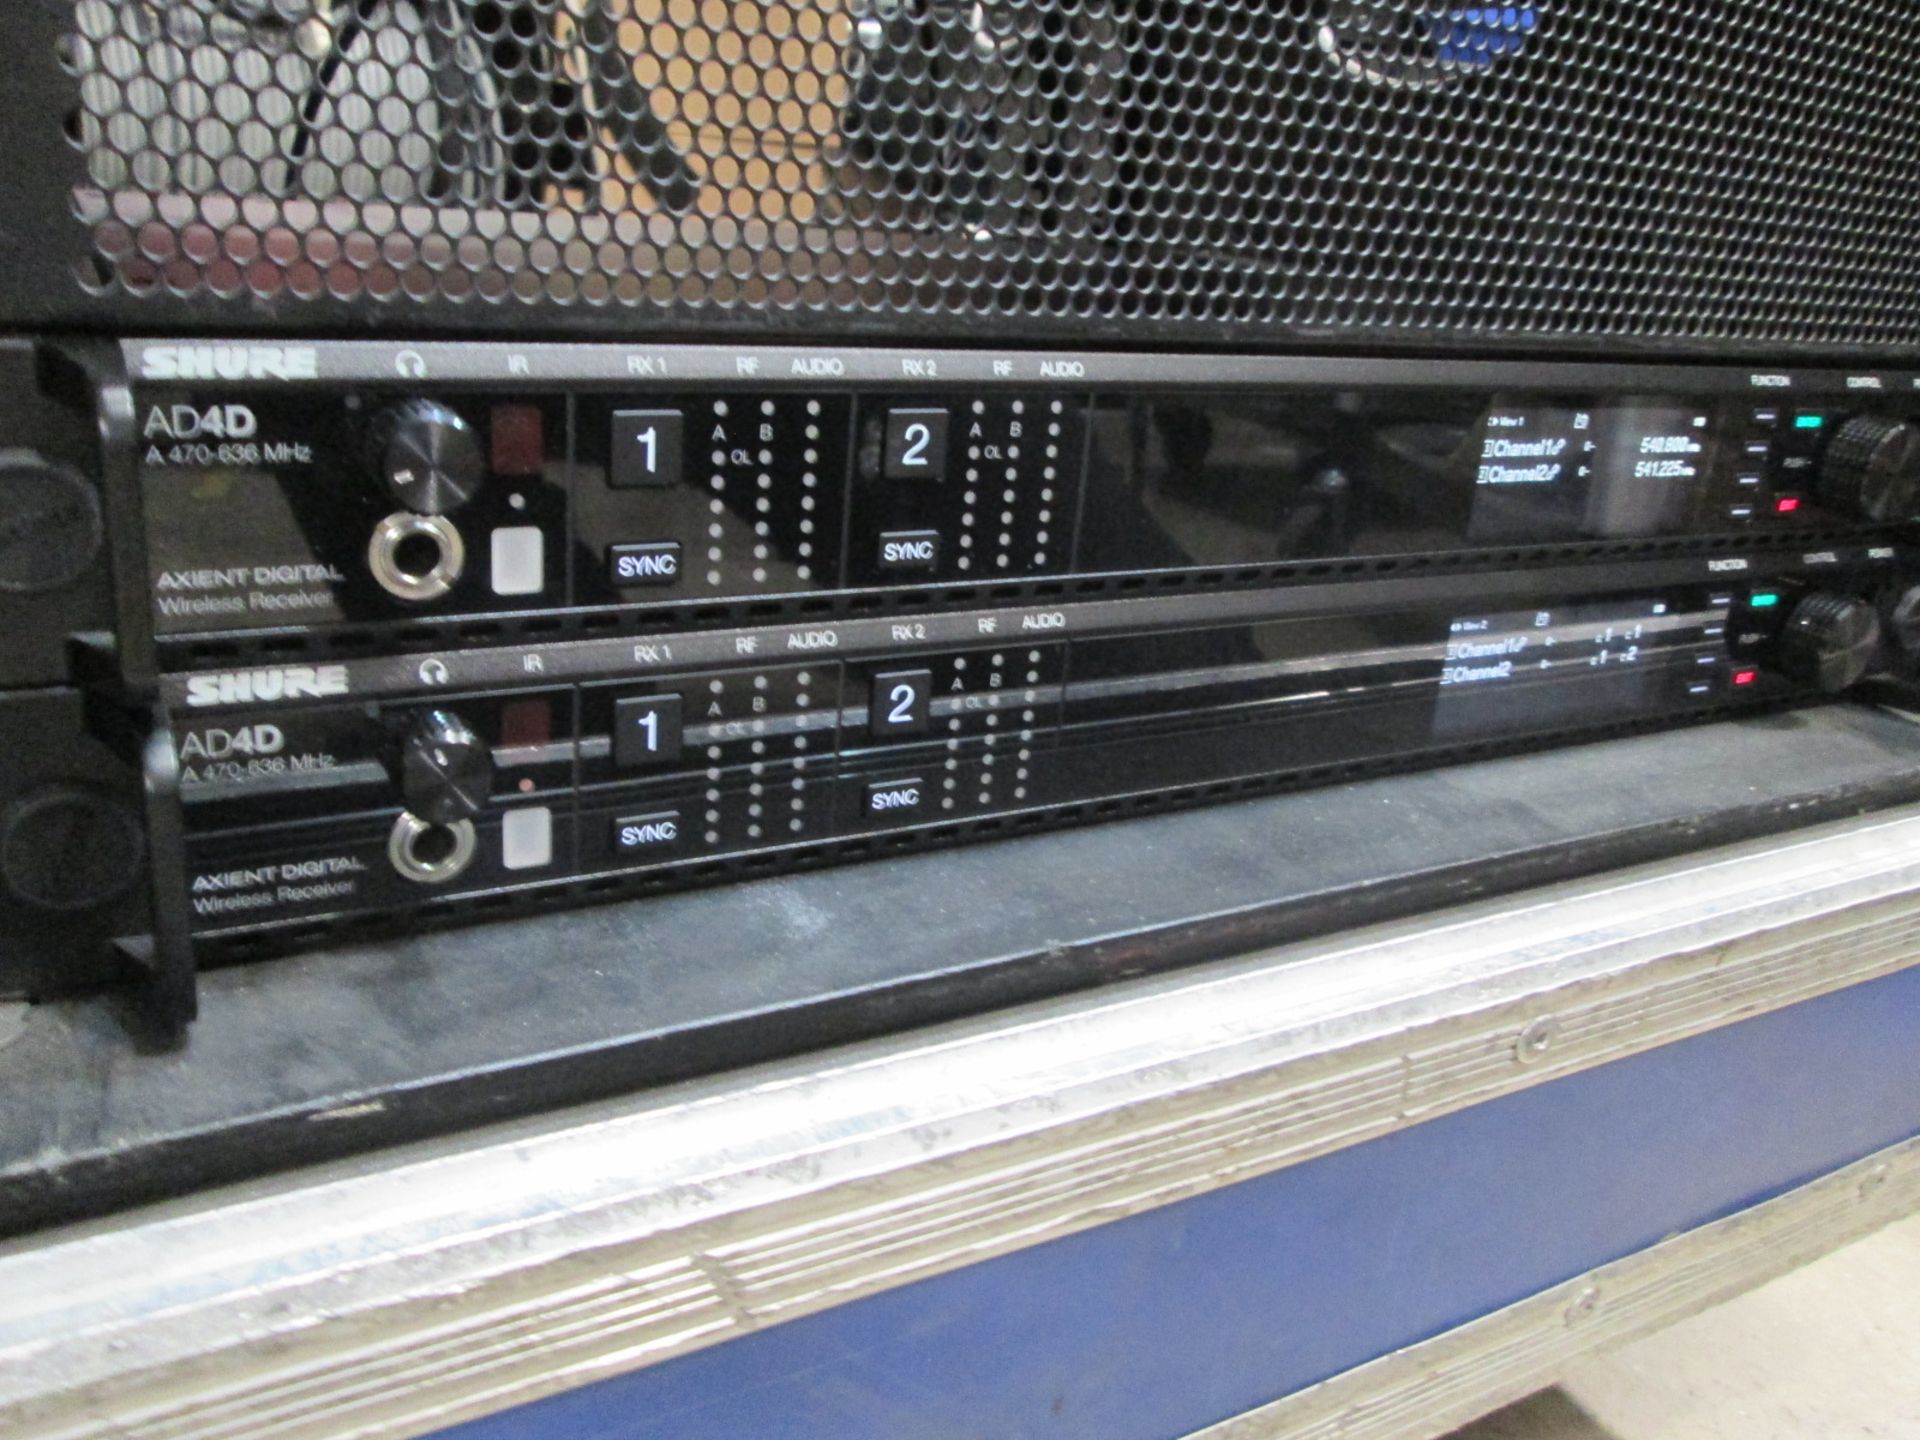 Shure Axiant Digital Radio Rack. To include 2 x AD4D 2 channel digital receivers (470.636 MHz), 4 - Image 3 of 14